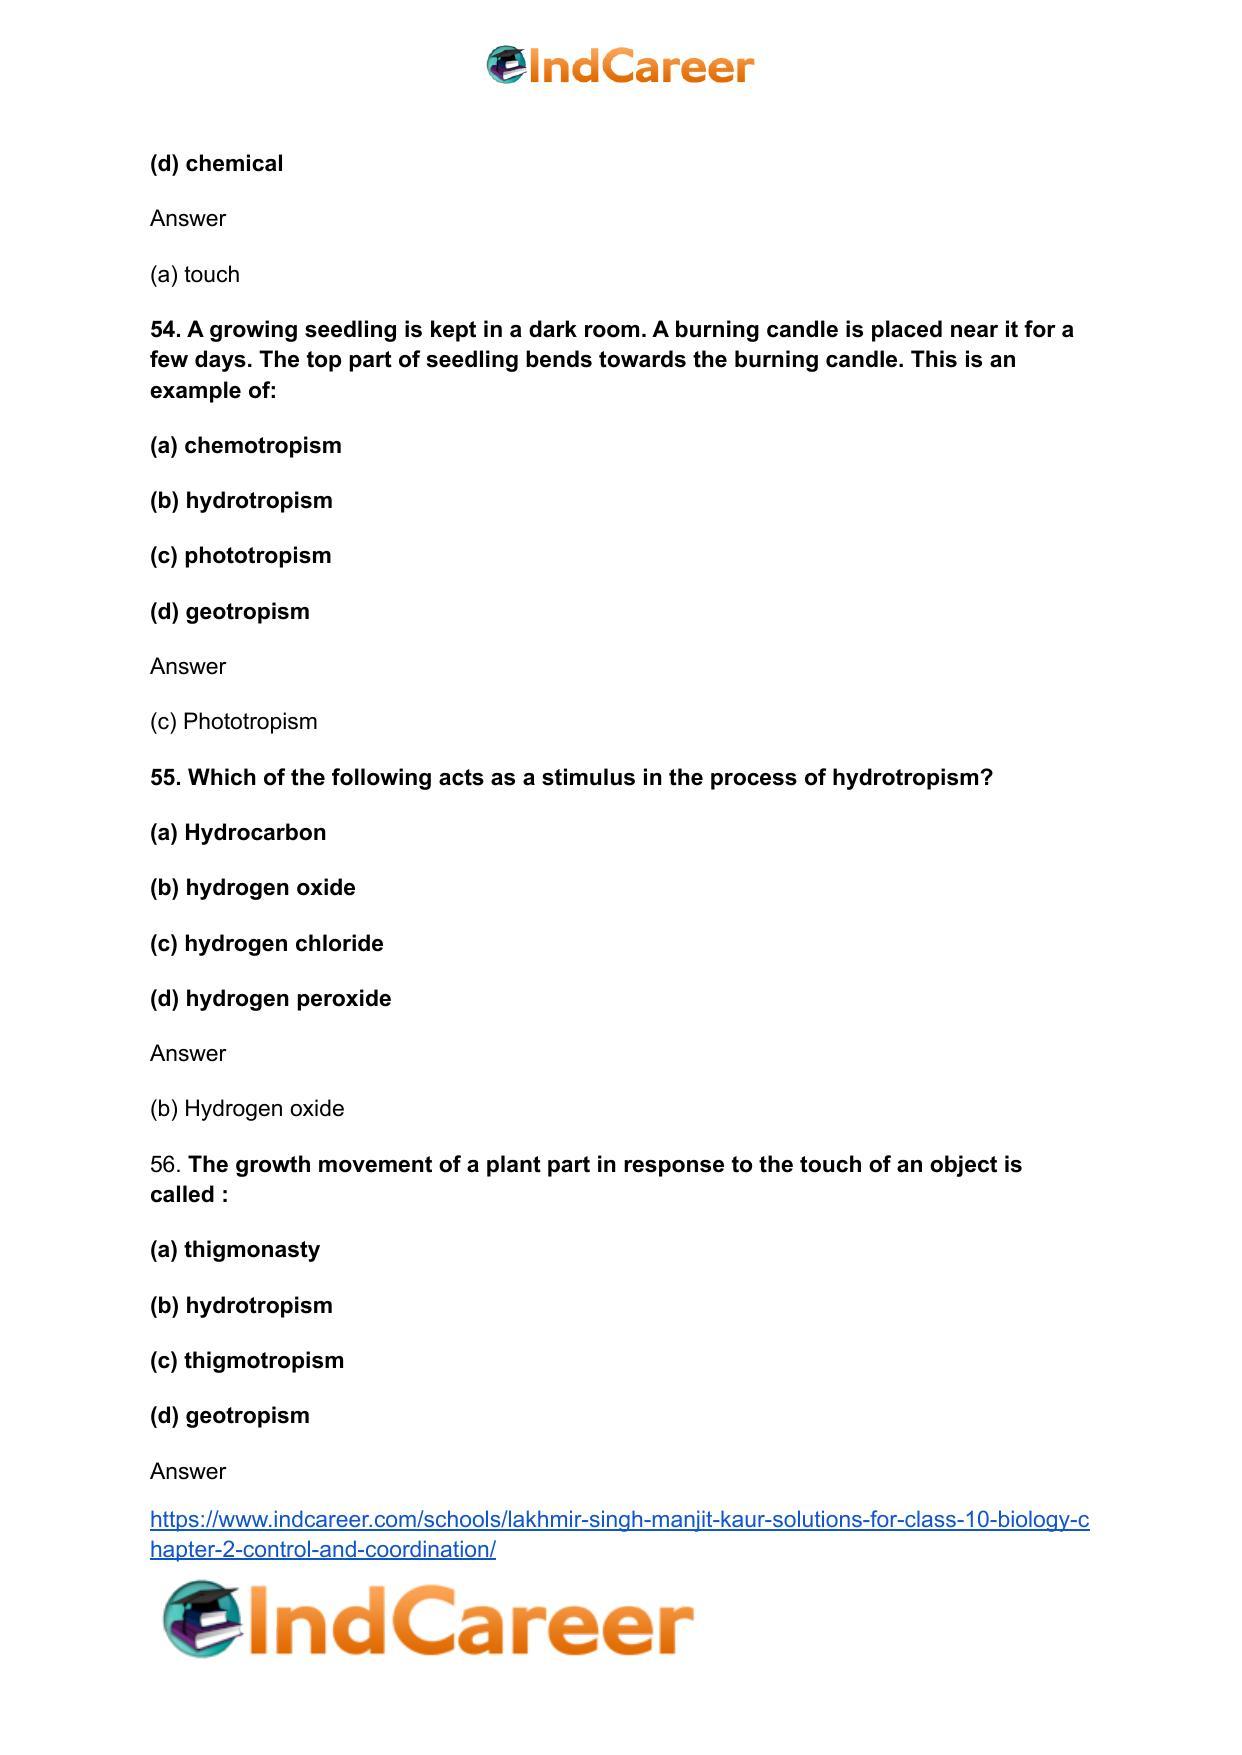 Lakhmir Singh Manjit Kaur  Solutions for Class 10 Biology: Chapter 2- Control And Coordination - Page 23